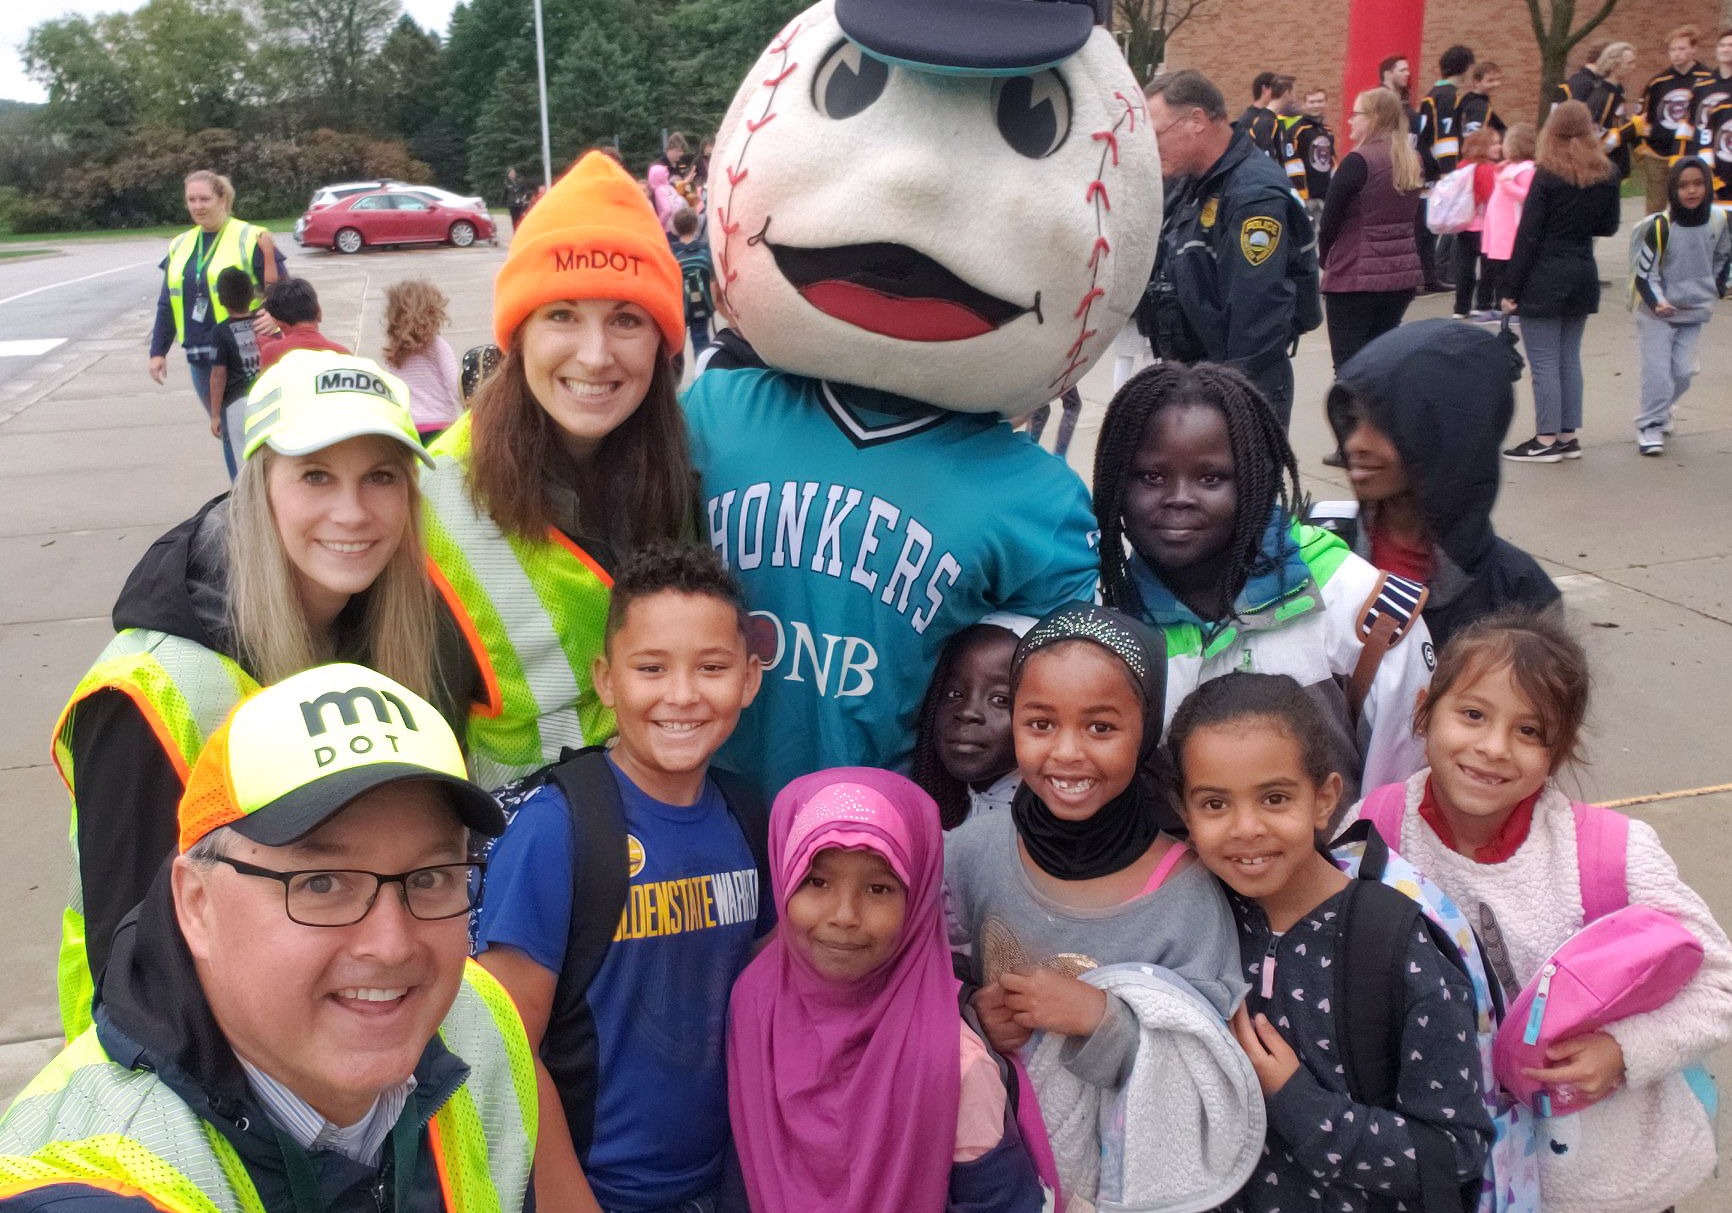 Three MnDOT employees and a group of school children pose on a sidewalk outside of the school. A mastoc with a large baseball for a head is also pictured with them.